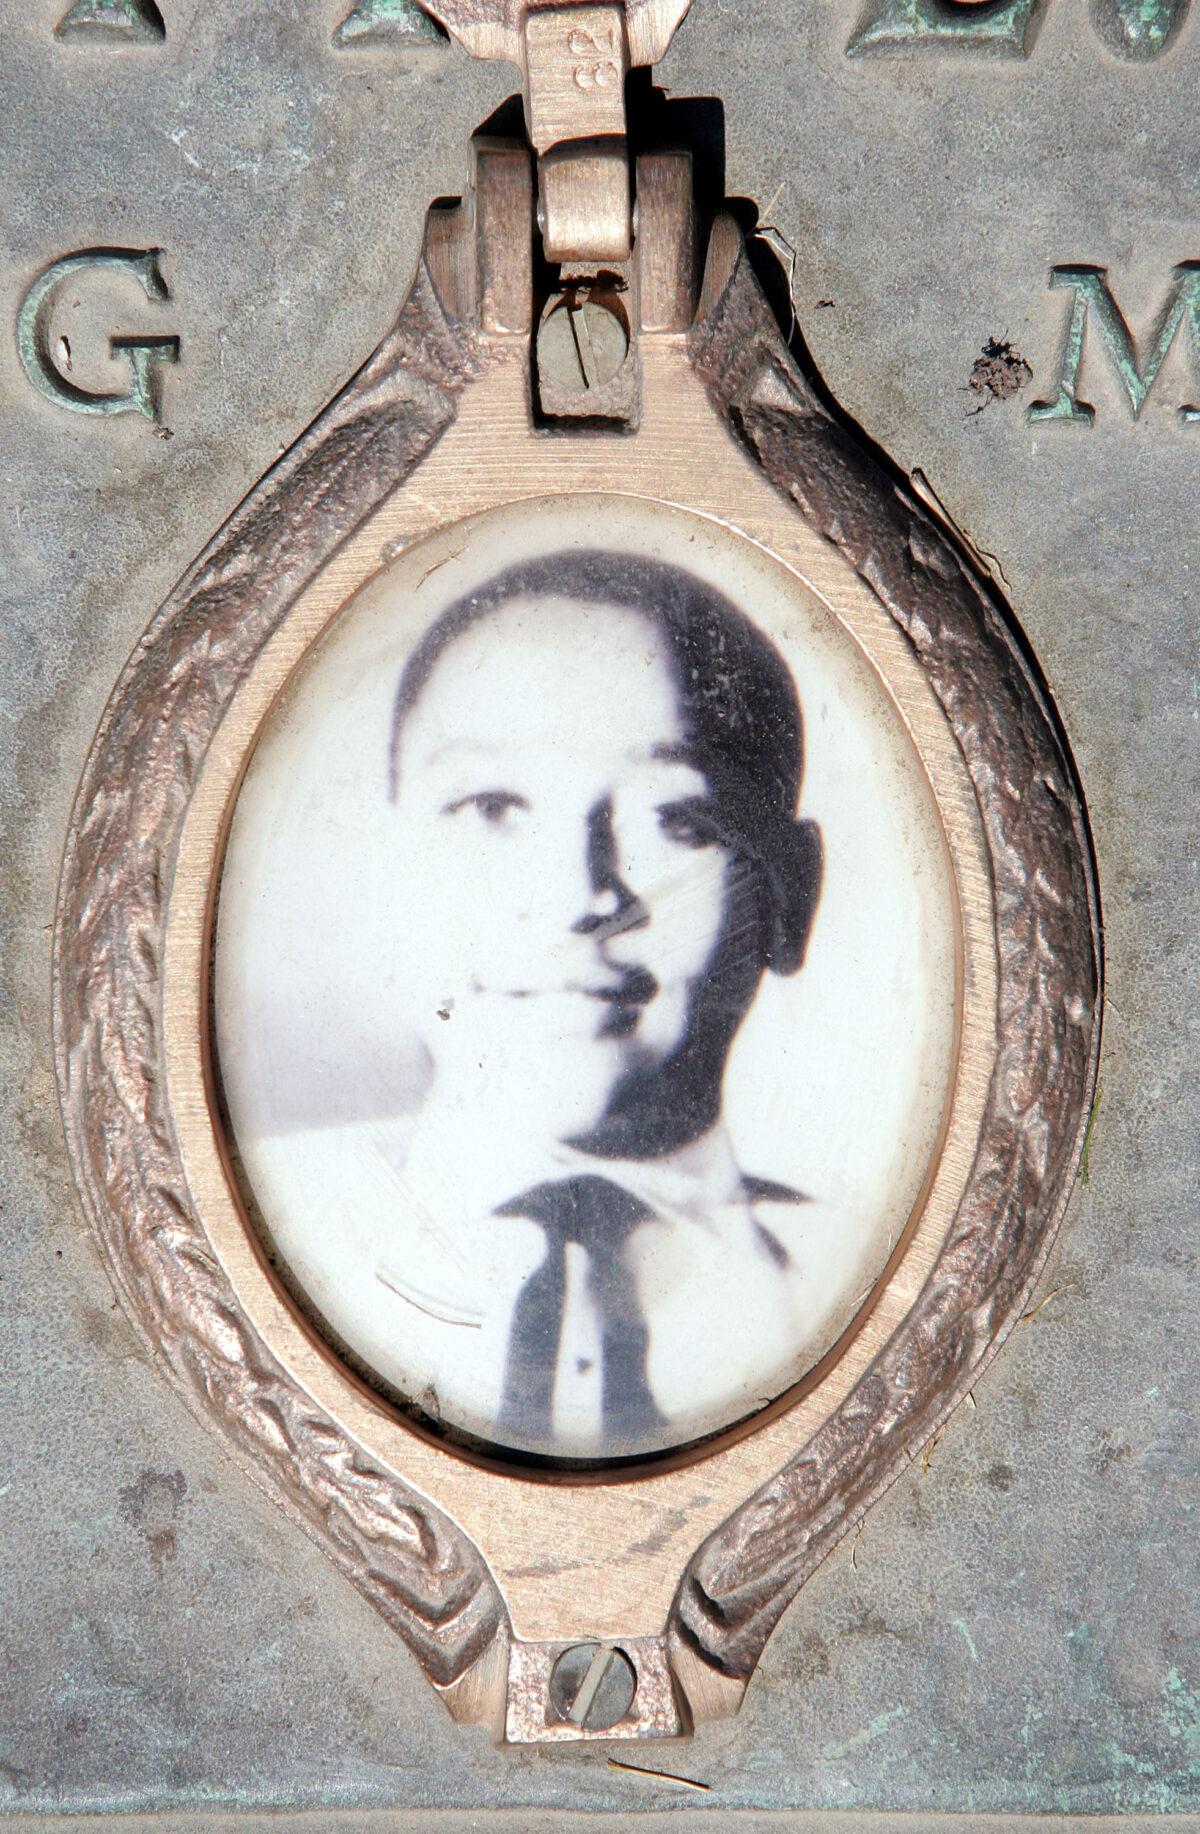 A photo of Emmett Till is included on the plaque that marked his gravesite in Illinois. (Scott Olson/Getty Images)